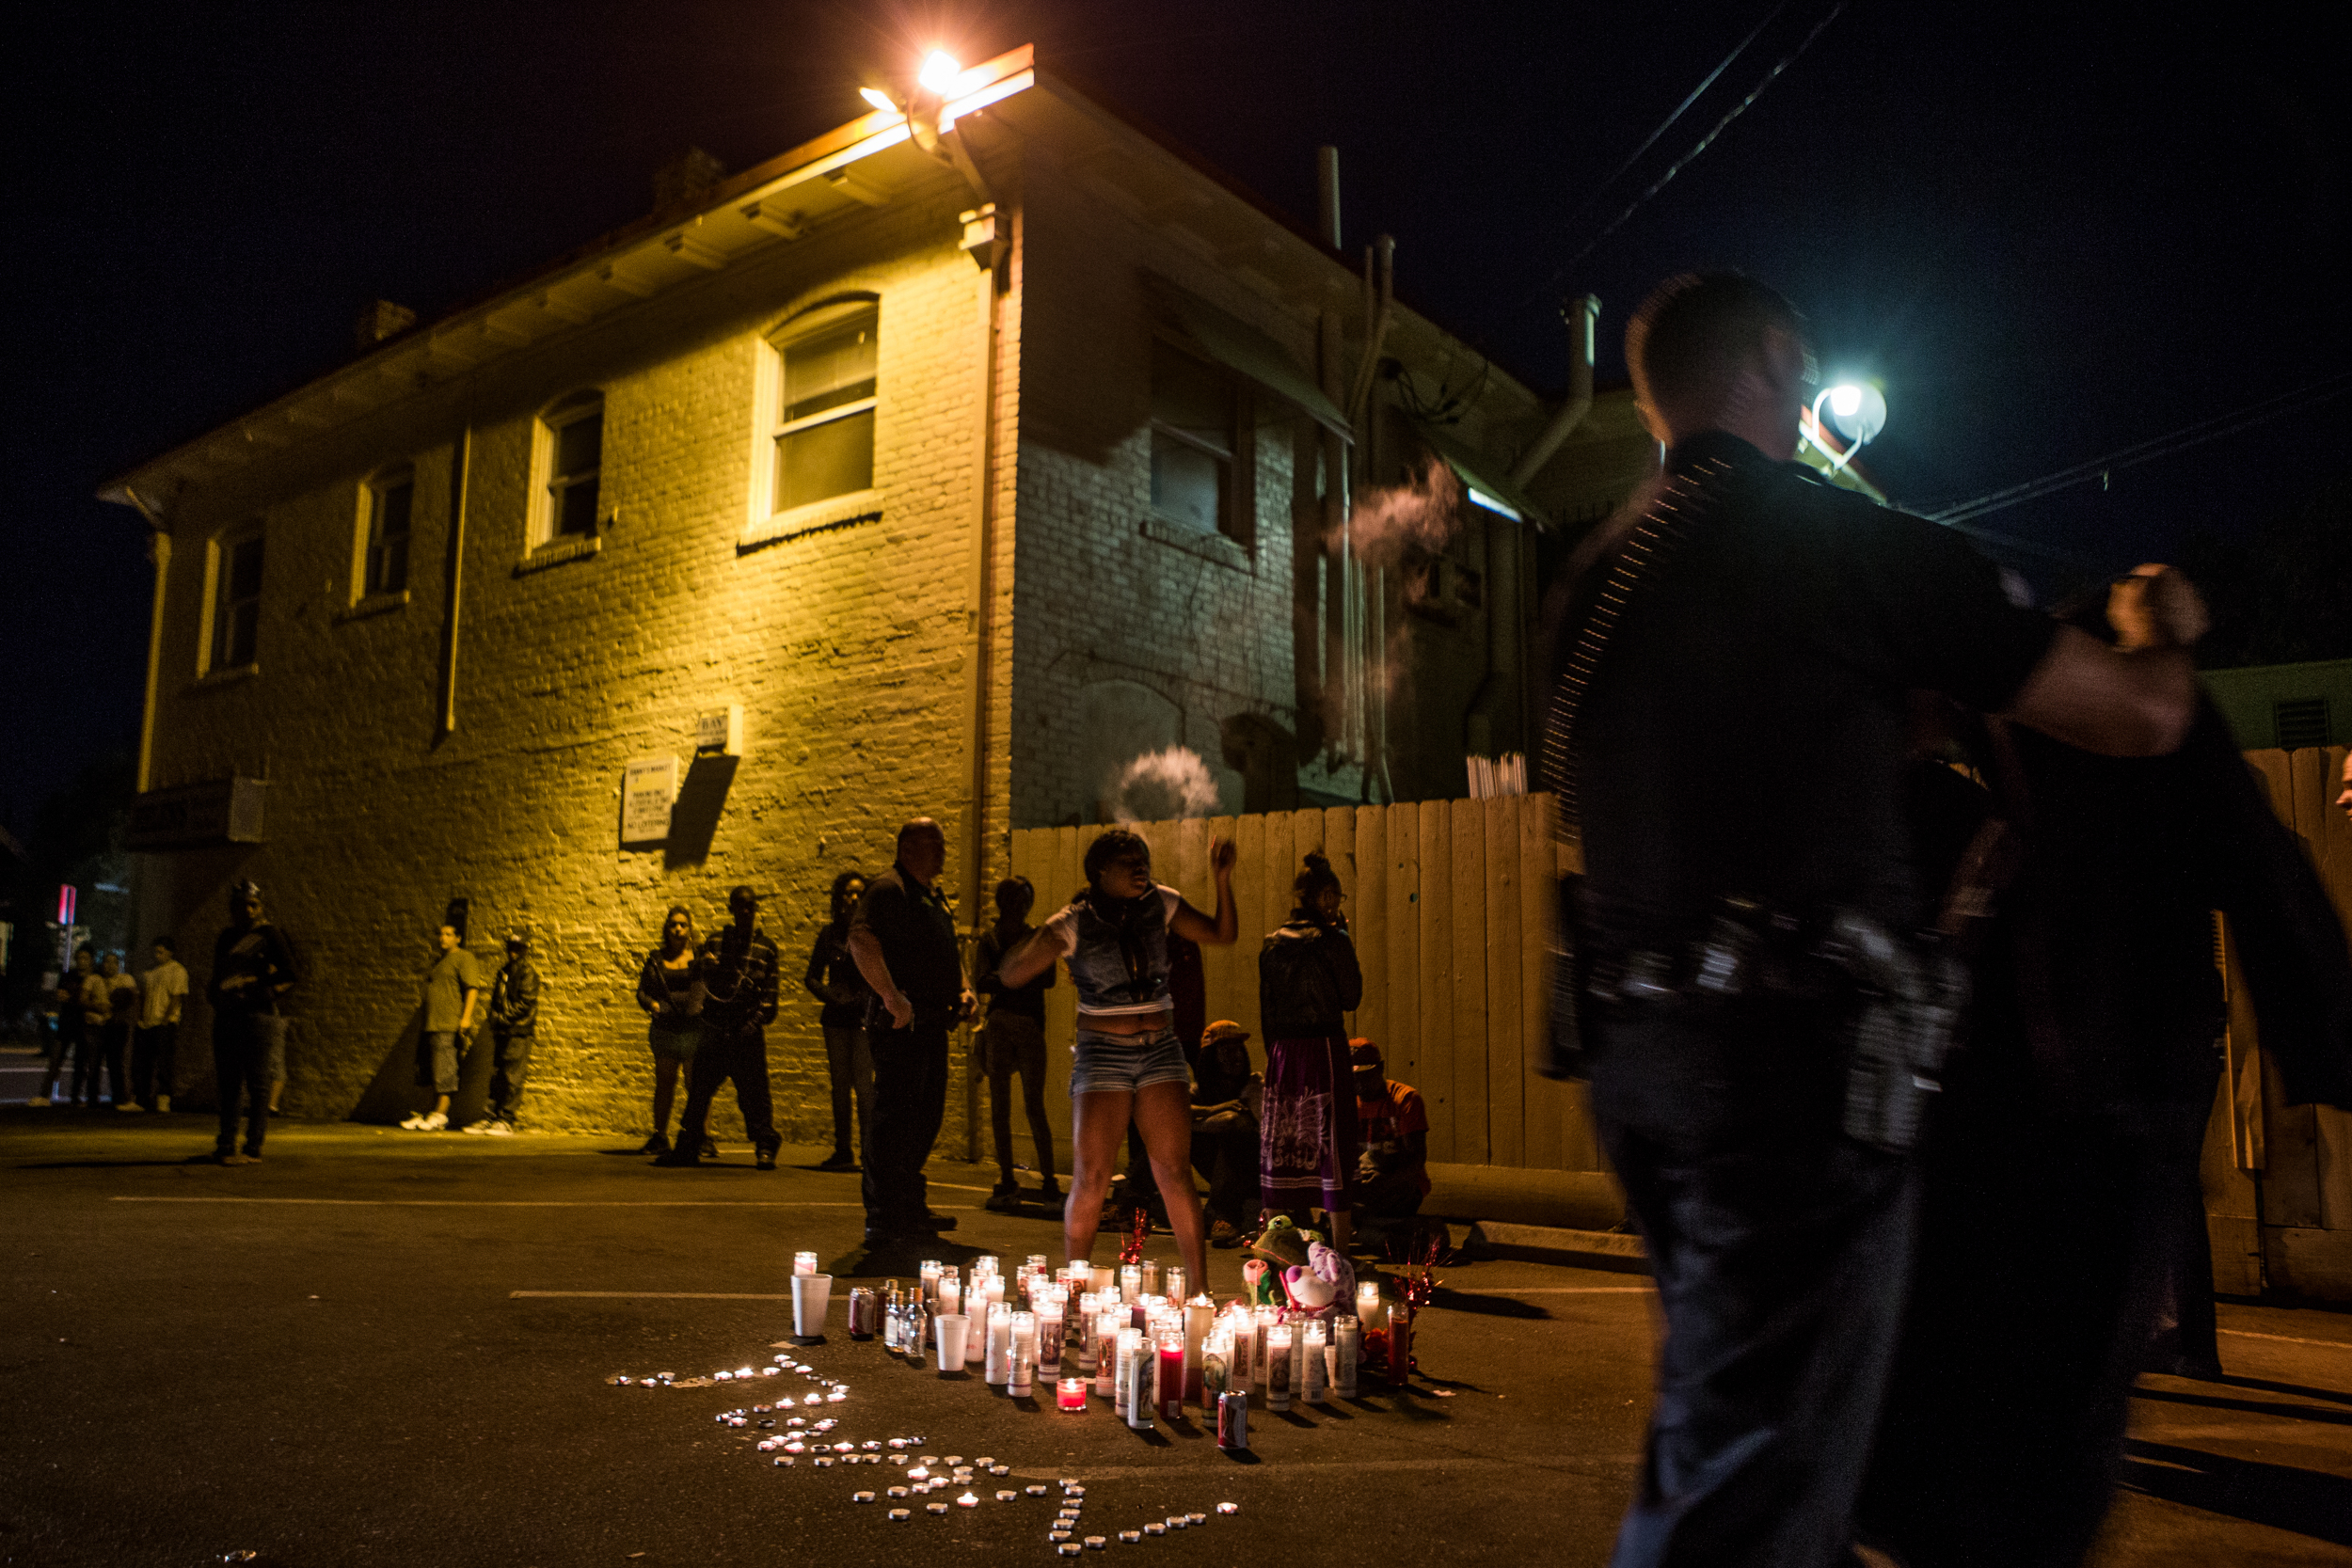  Members of Stockton's Community Response Team question mourners at the site of a memorial for five people shot the night before in Stockton, California, September 18, 2013. Facing stark and rising homicide rates, the California cities Oakland and St